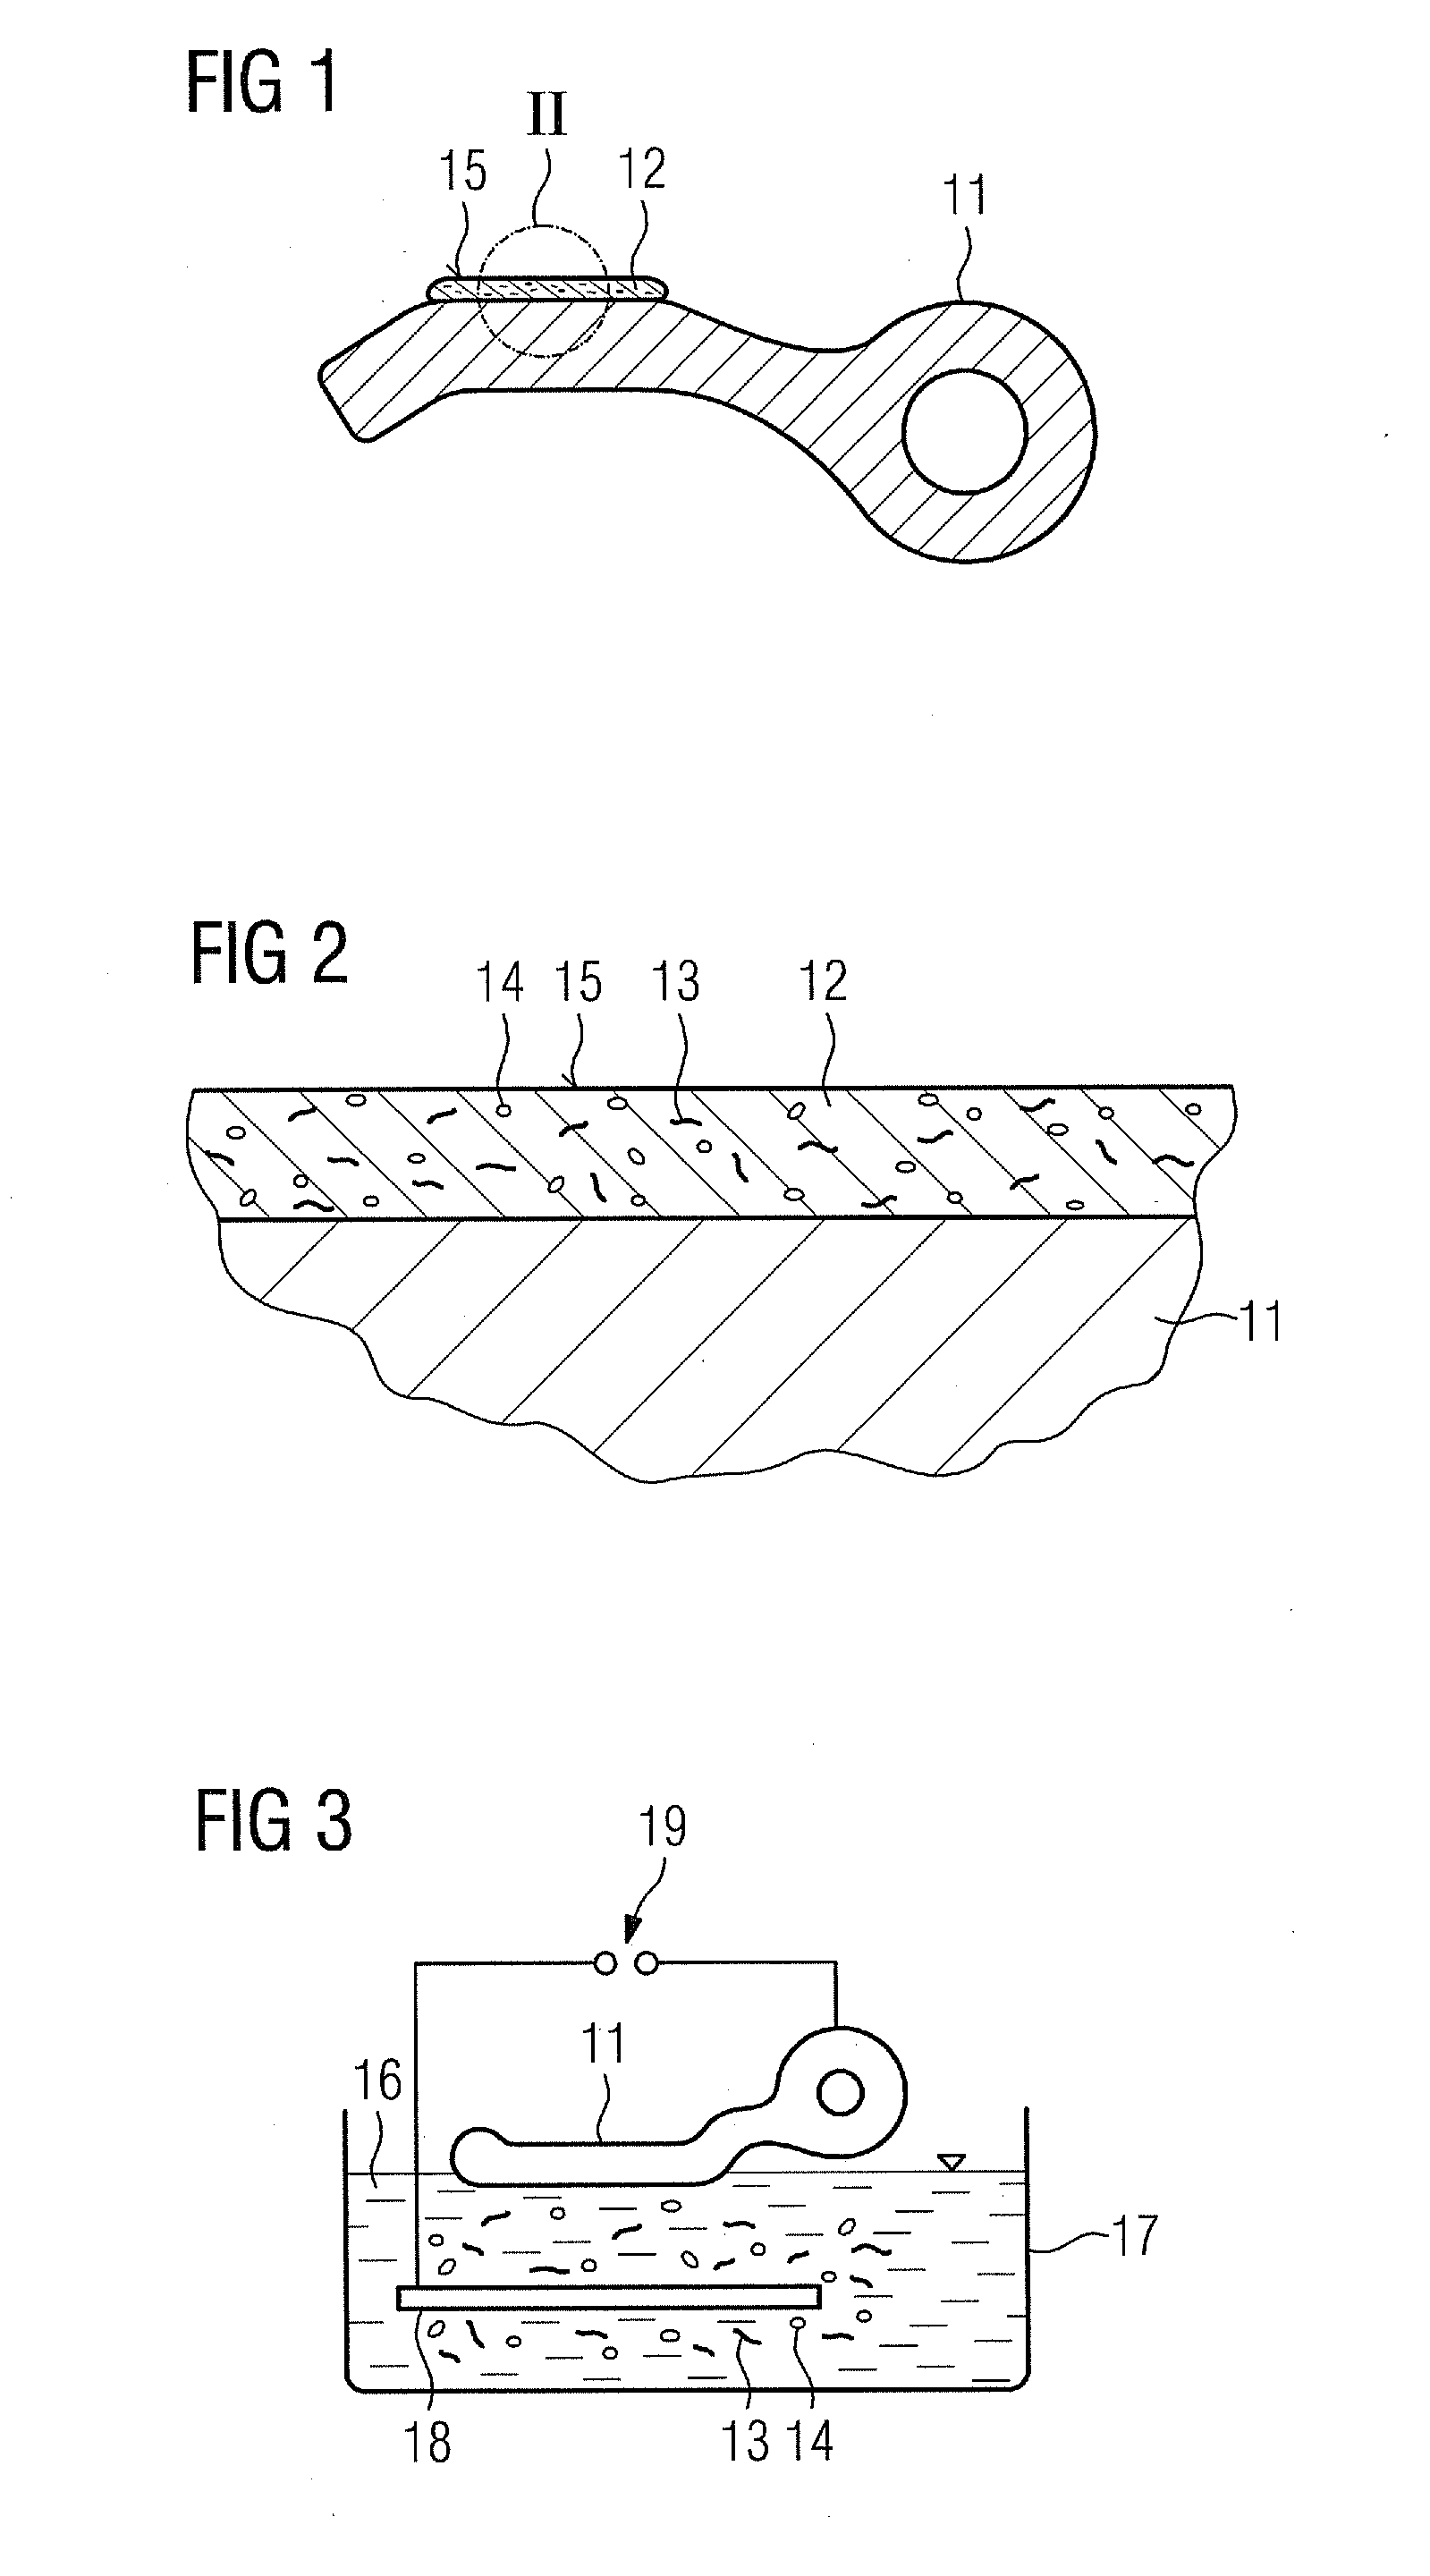 Component with a Layer into which CNT (Carbon Nanotubes) are Incorporated and a Method for the Manufacture of Said Component